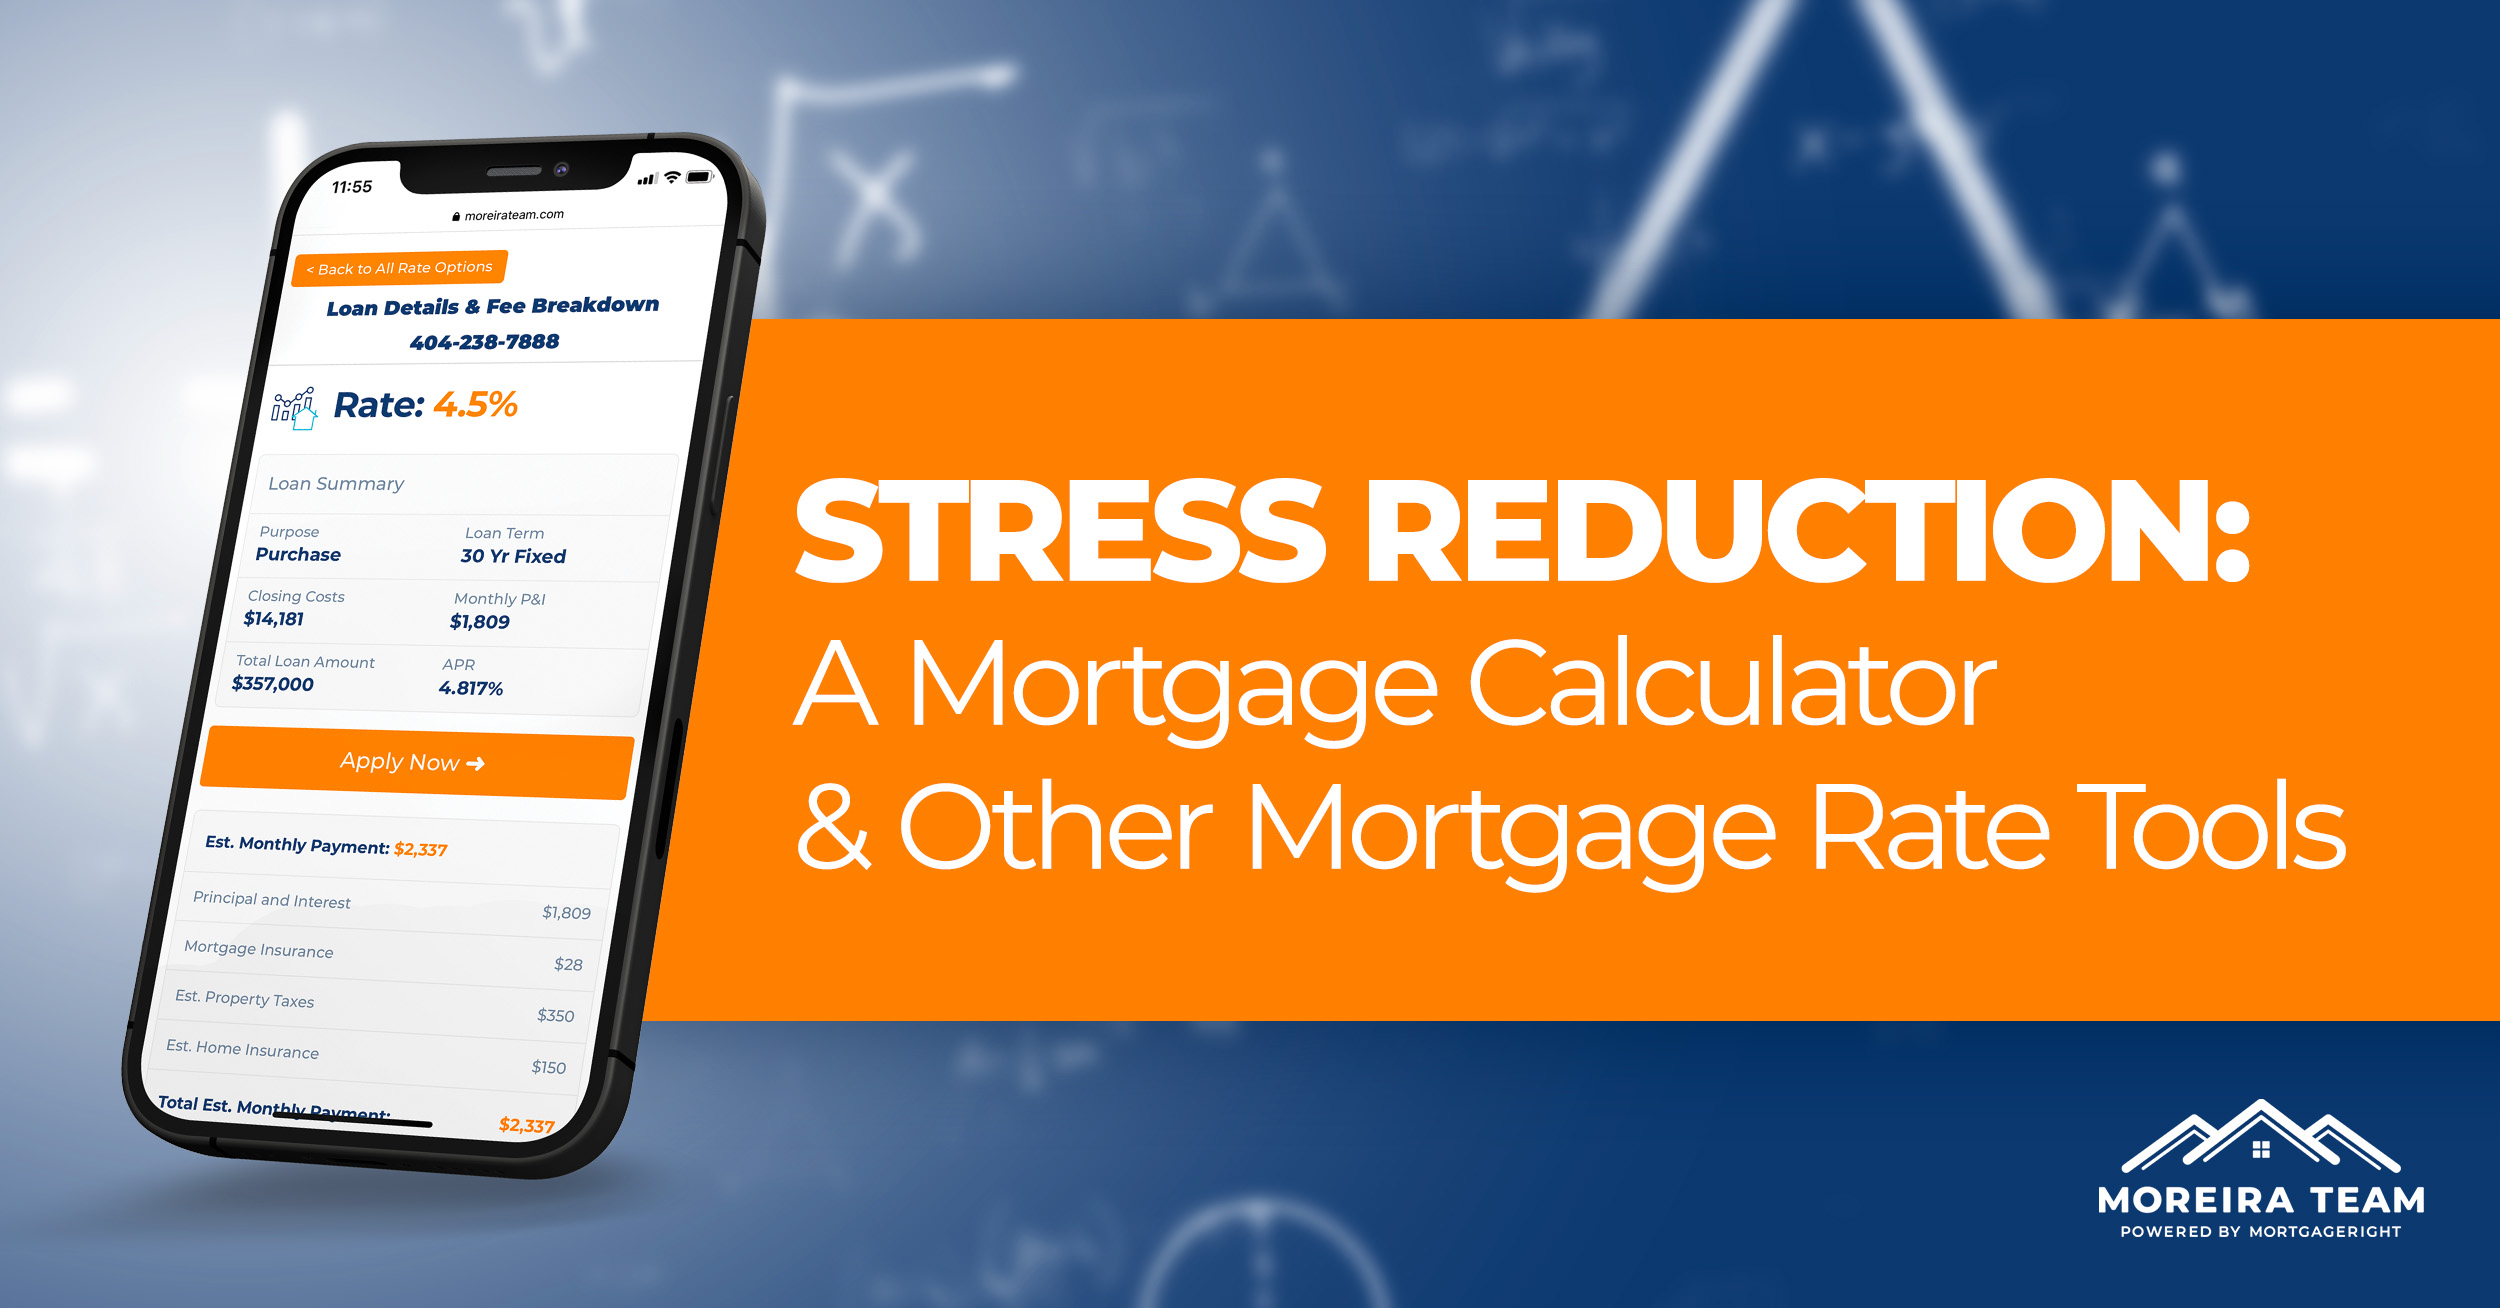 Mortgage calculator and mortgage rate tools